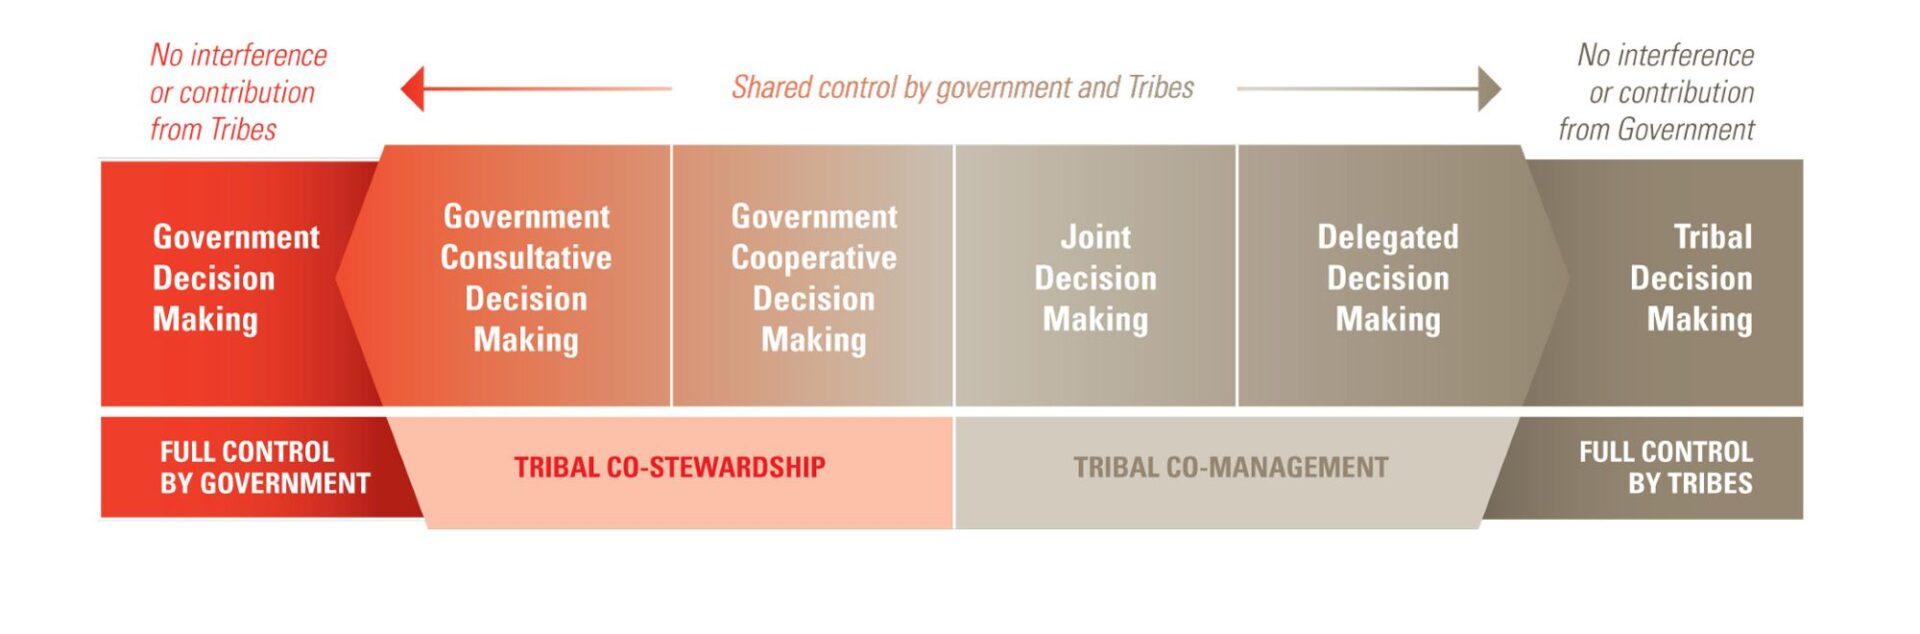 Figure 1: Tribal Co-Stewardship and Tribal Co-Management shown on a spectrum of control shared by government agencies and Tribes. John Welch and Kathleen Bader